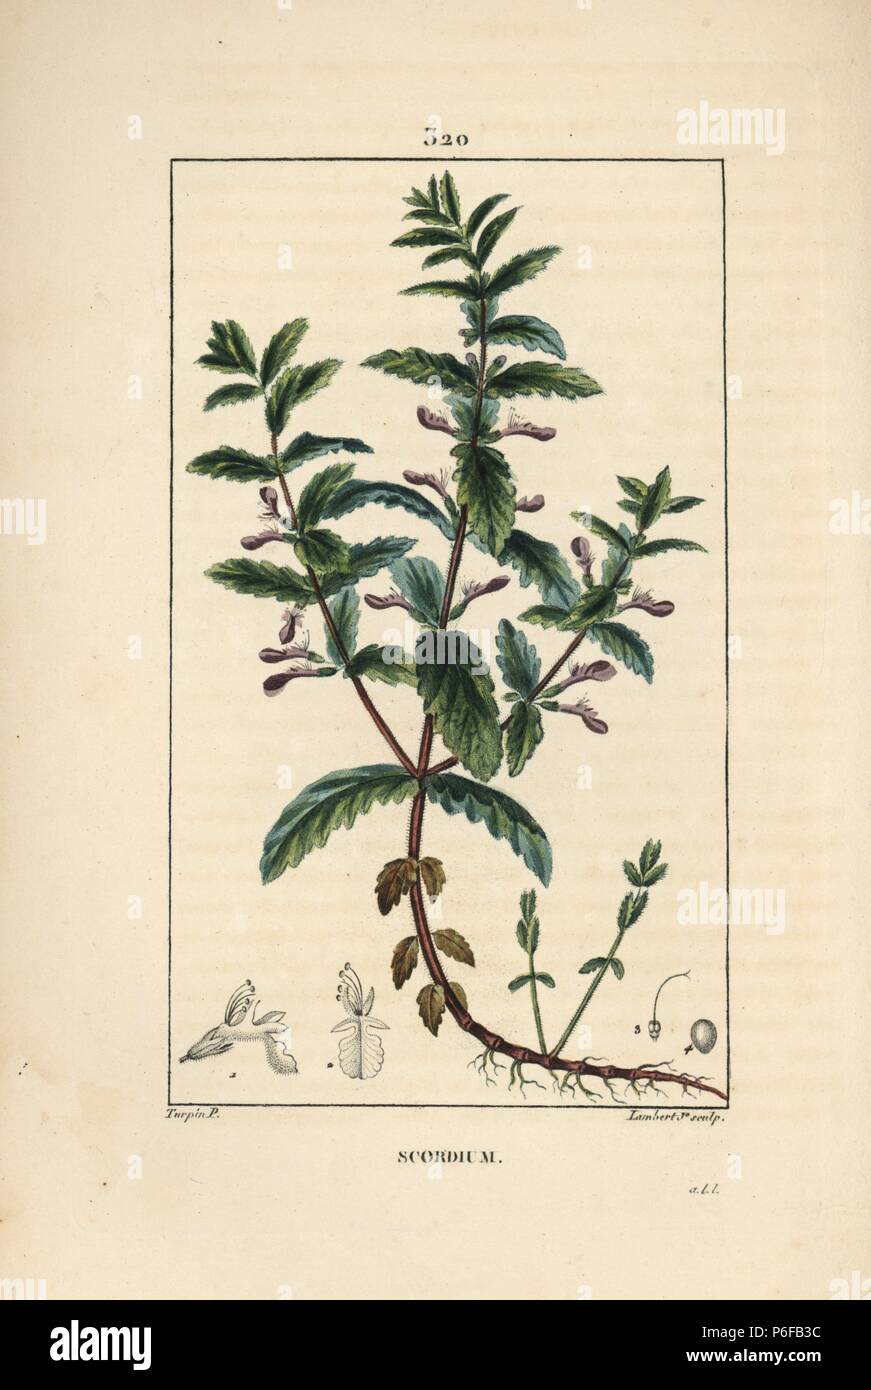 Water germander, Teucrium scordium, showing flower, leaf, stalk and roots. Handcoloured stipple copperplate engraving by Lambert Junior from a drawing by Pierre Jean-Francois Turpin from Chaumeton, Poiret and Chamberet's 'La Flore Medicale,' Paris, Panckoucke, 1830. Turpin (17751840) was one of the three giants of French botanical art of the era alongside Pierre Joseph Redoute and Pancrace Bessa. Stock Photo